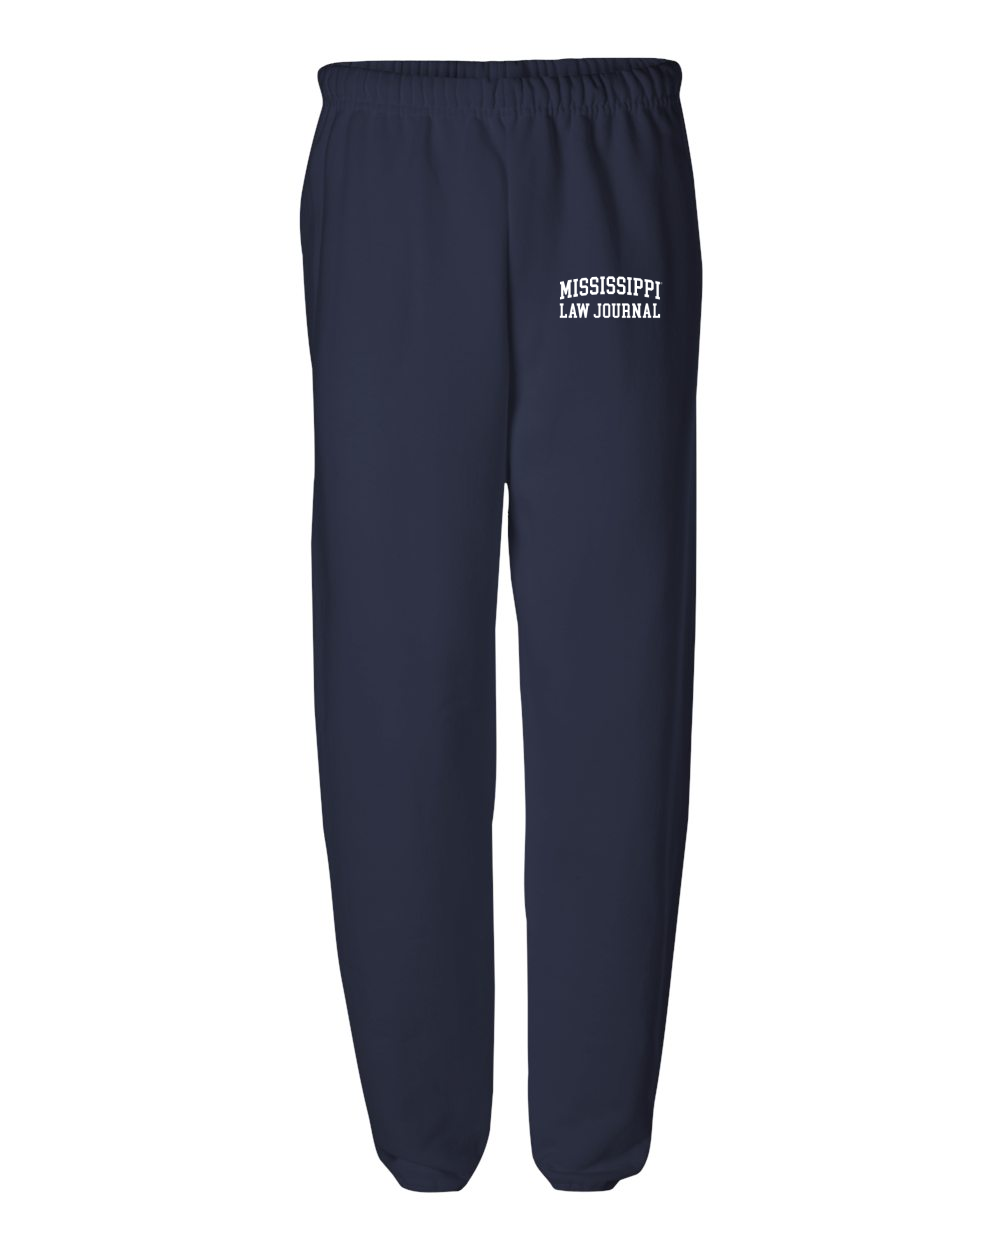 Mississippi® Law Journal Sweatpants | Navy